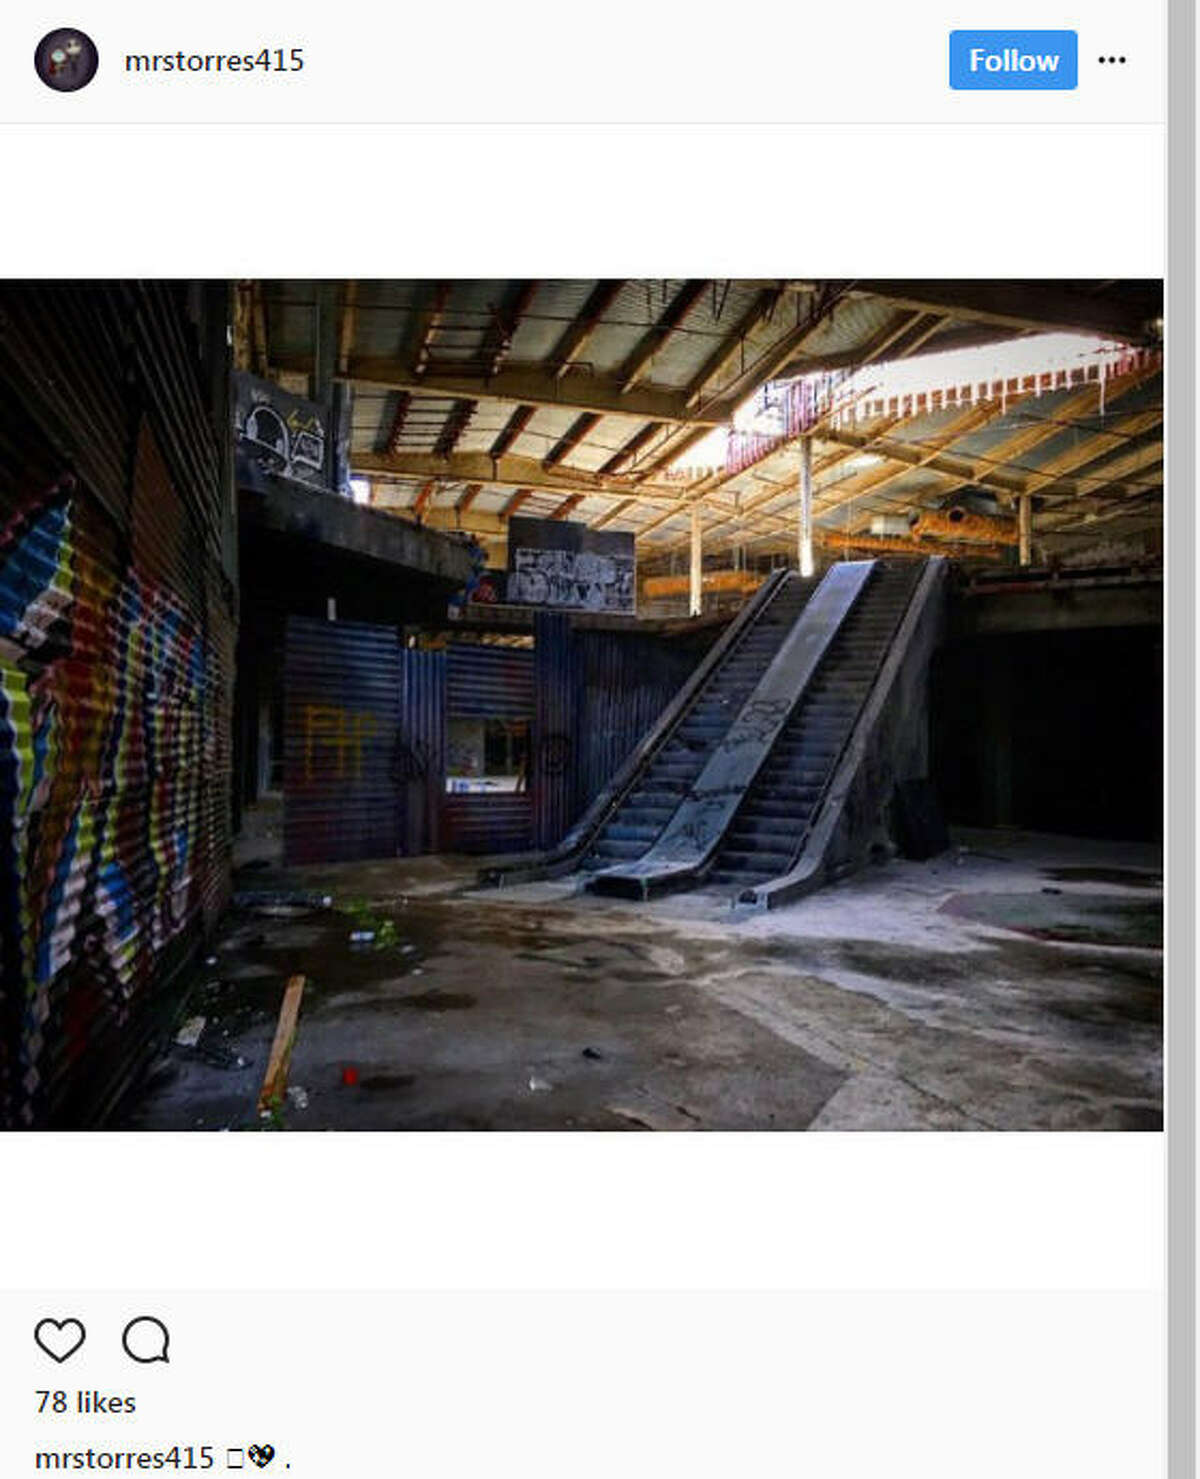 As online shopping continues to grow, some malls are becoming ghost towns and surreal for those who explore them.Image source: Instagram